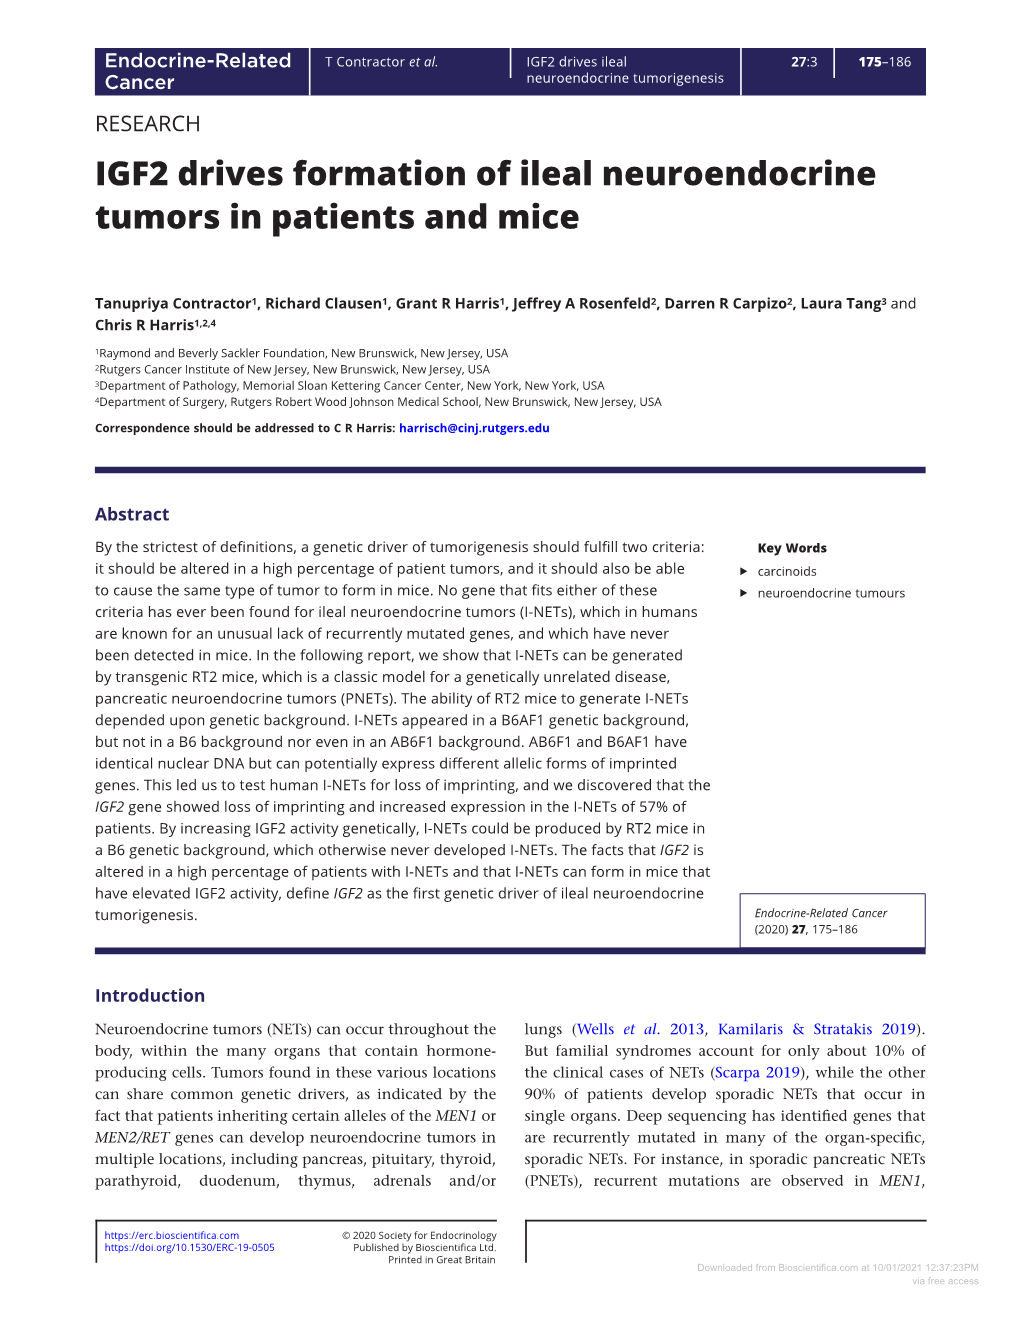 IGF2 Drives Formation of Ileal Neuroendocrine Tumors in Patients and Mice